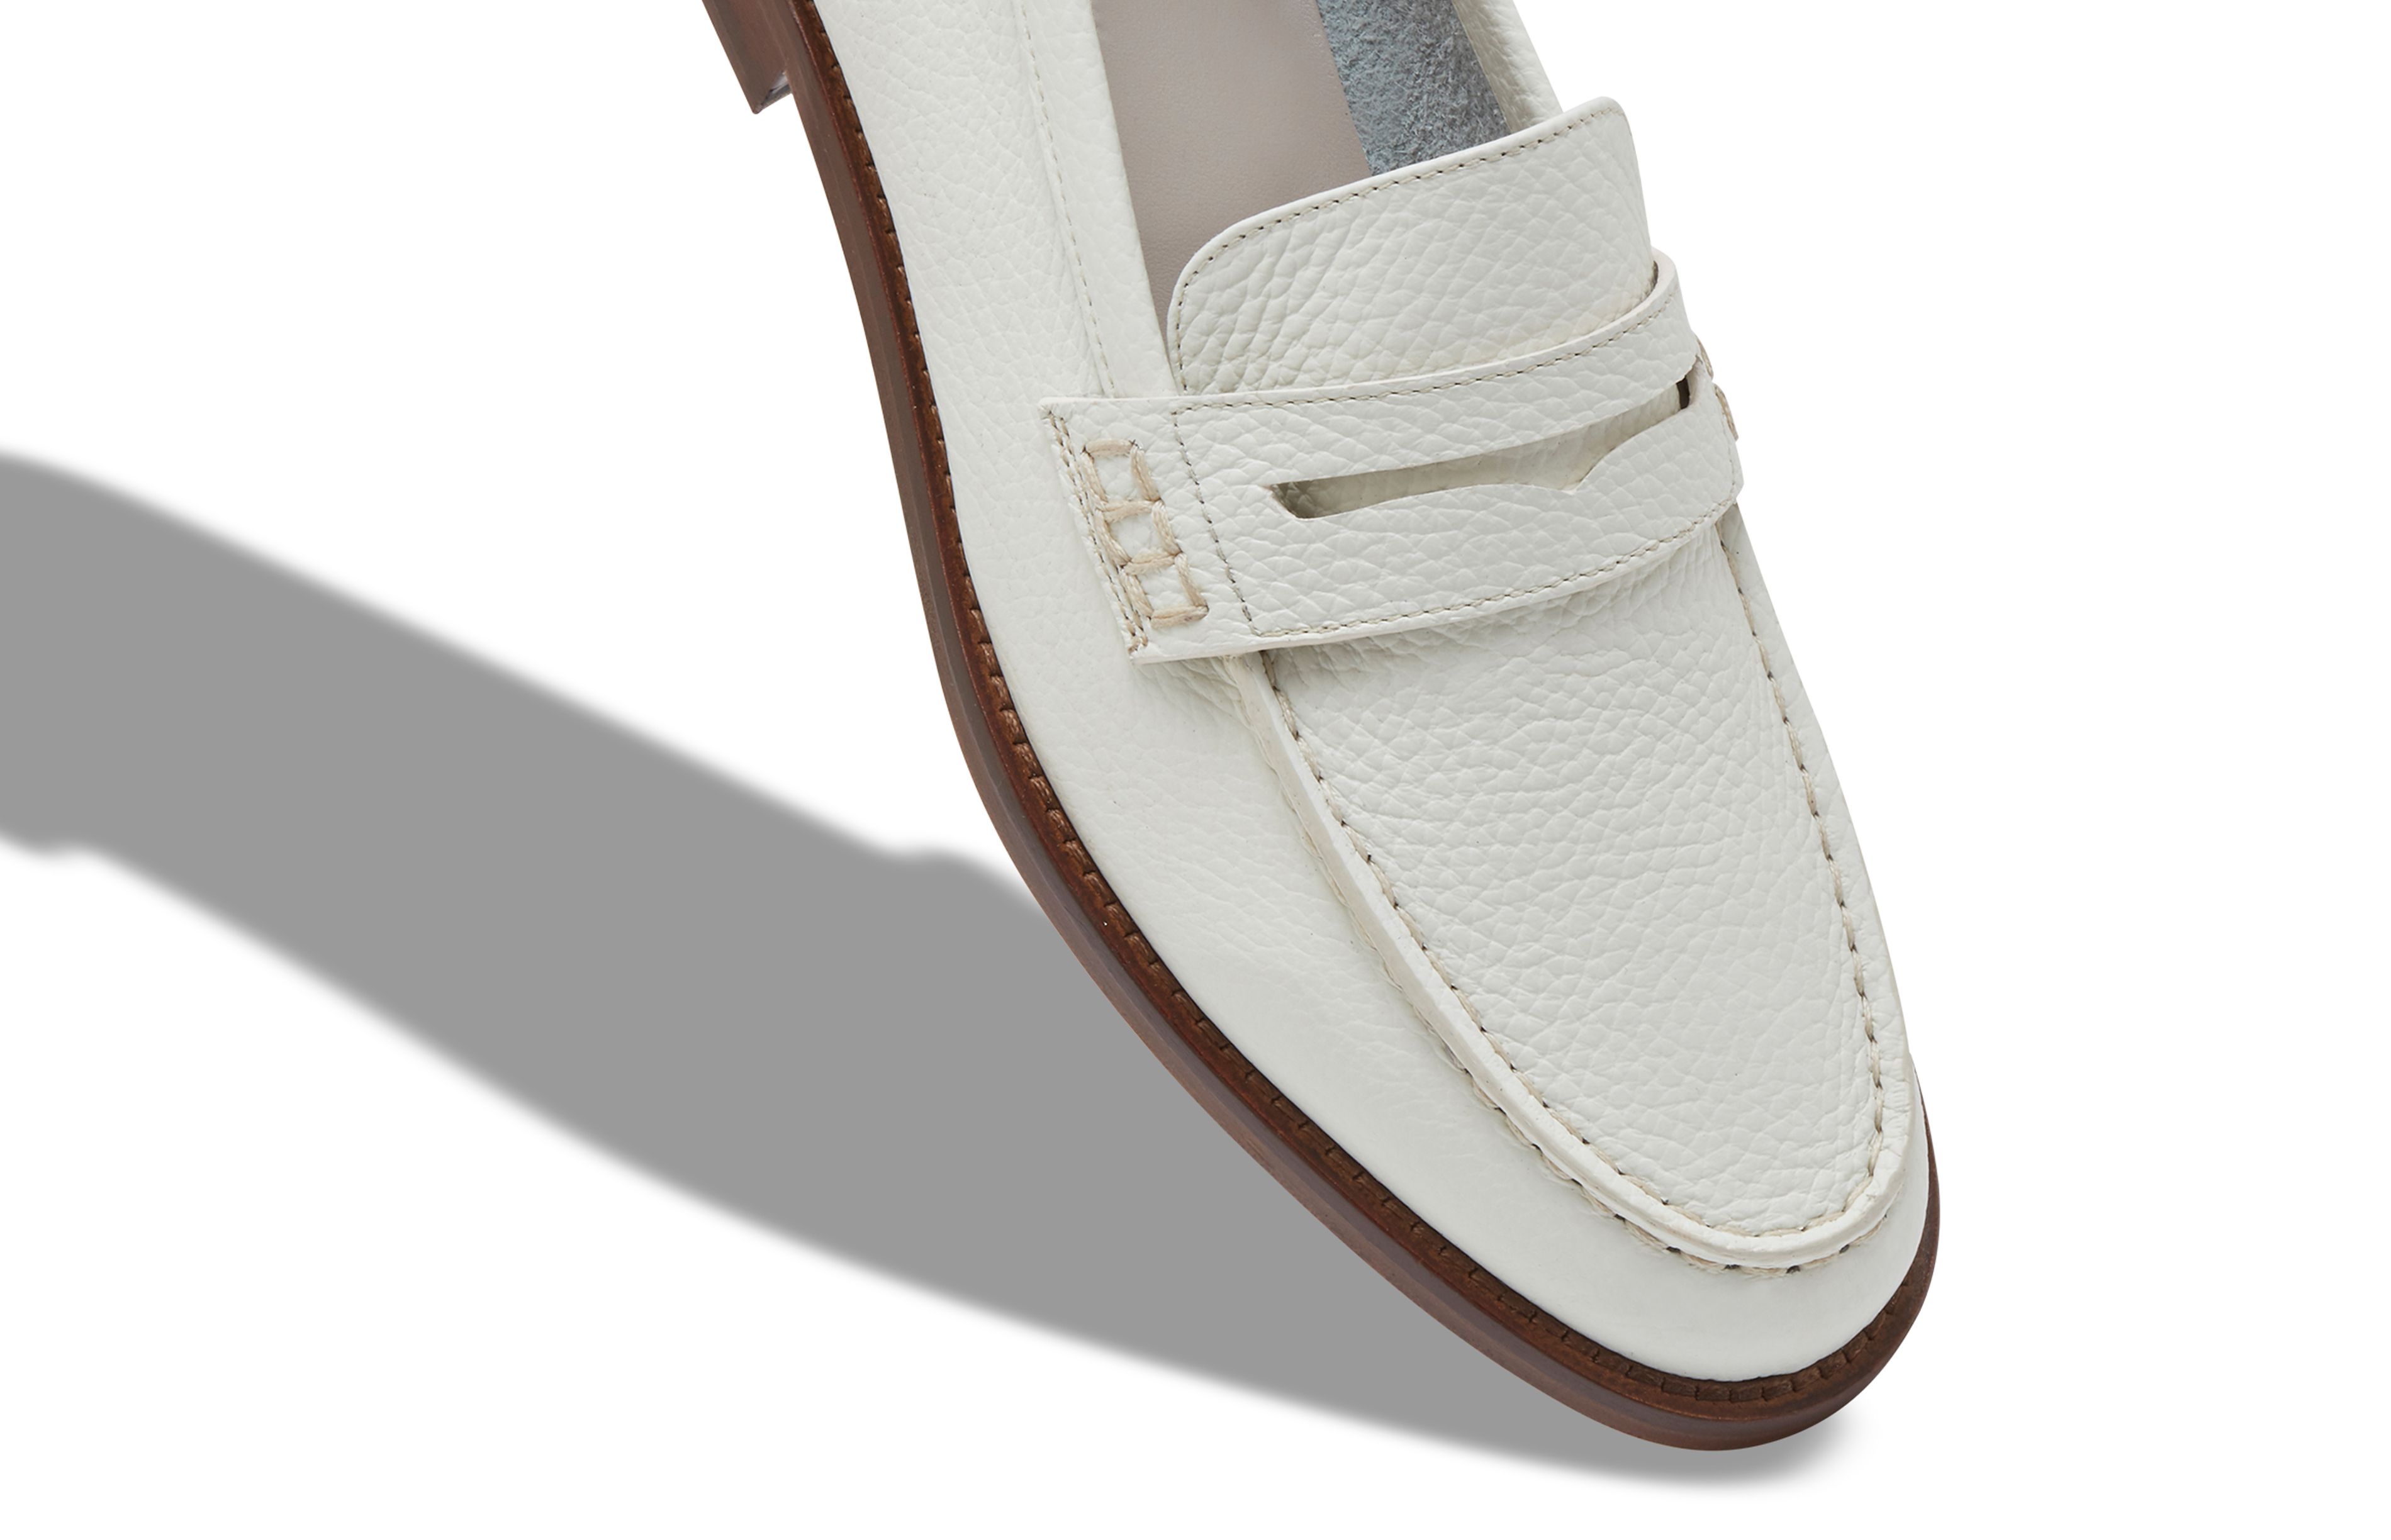 PERRY | White Calf Leather Penny Loafers | Manolo Blahnik